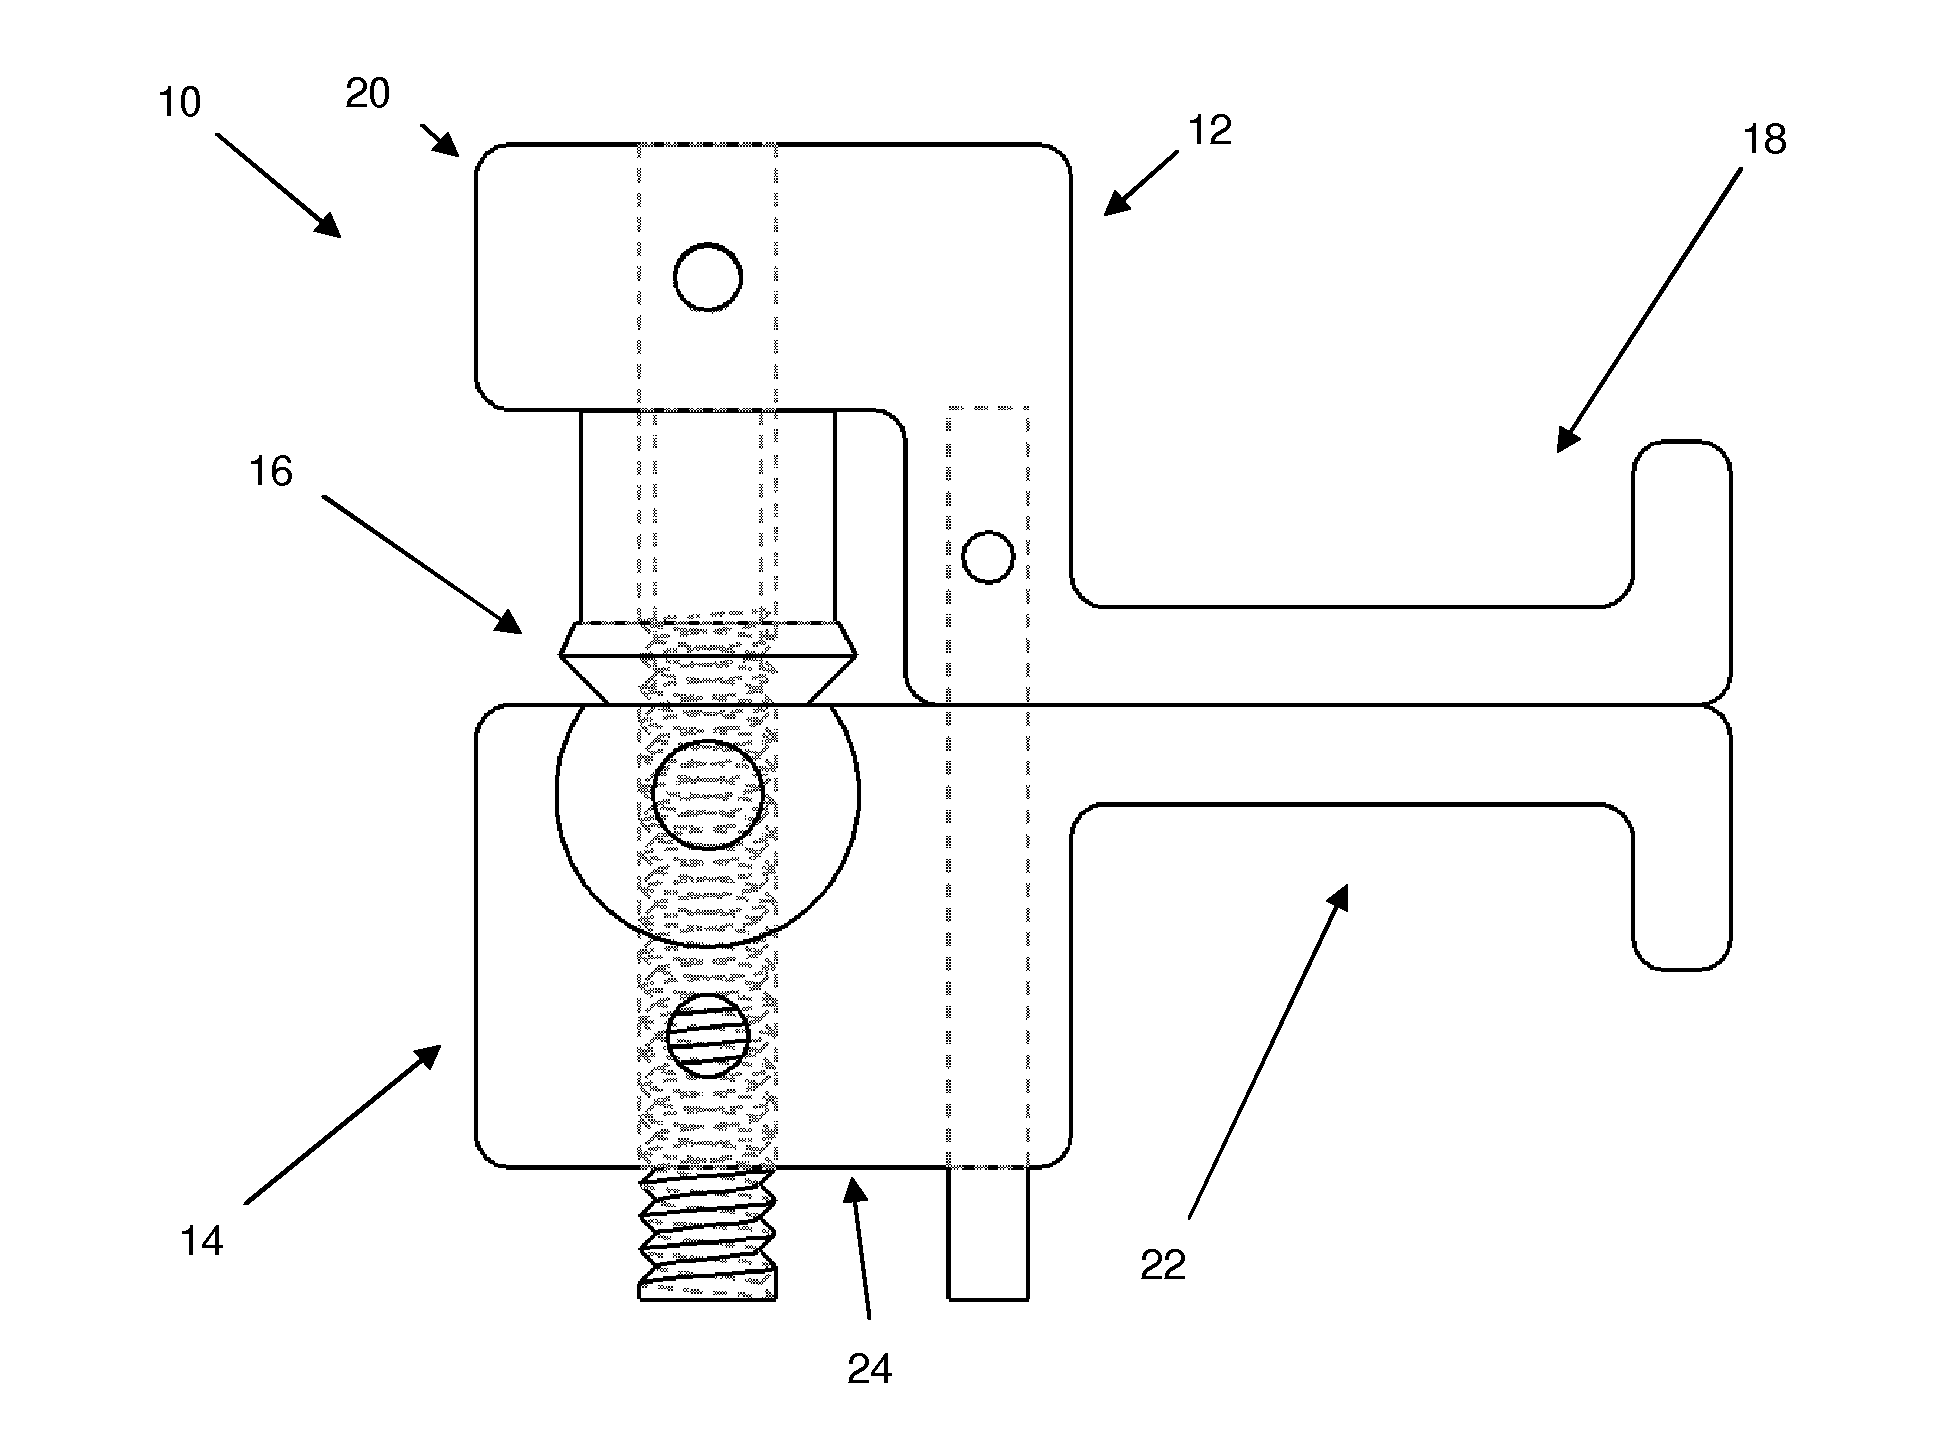 Spinal decompression system and method